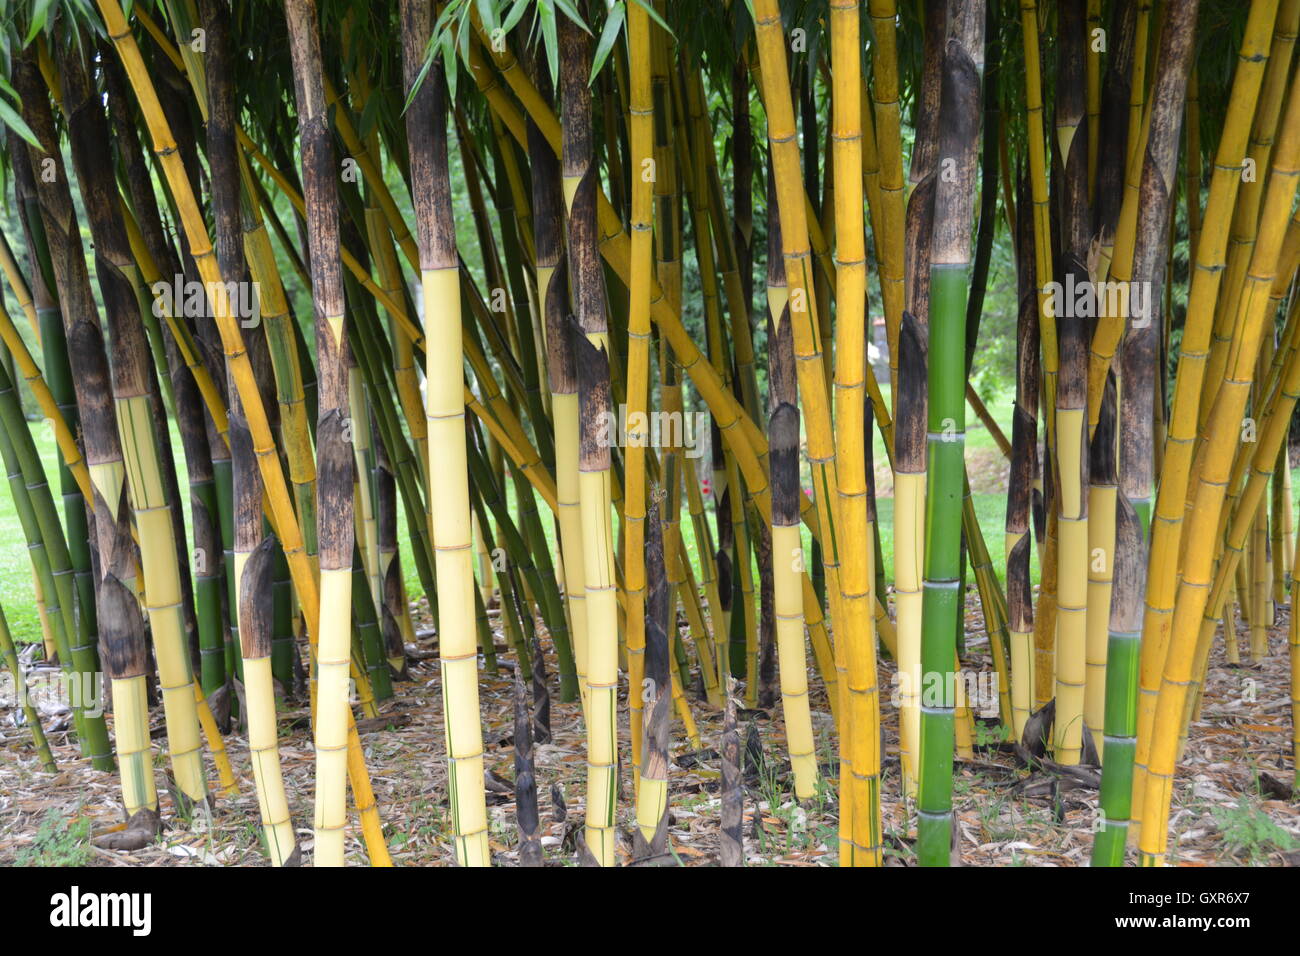 Thick Species Bamboo in Garden Clump Stock Photo